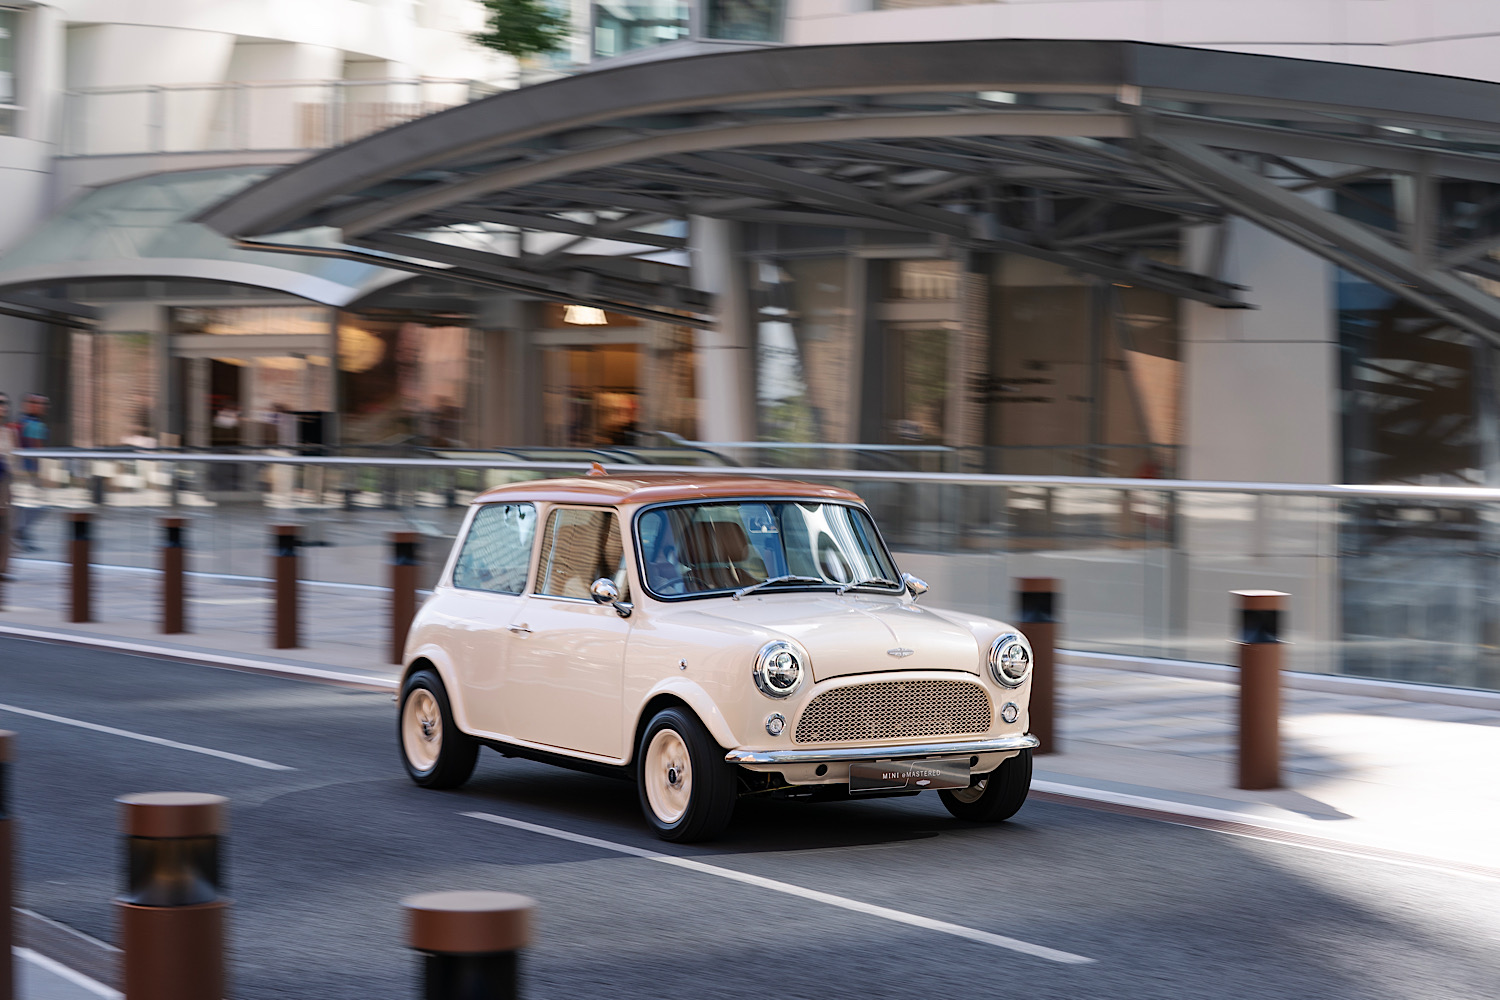 David Brown launches electric Mini. Image by David Brown Automotive.